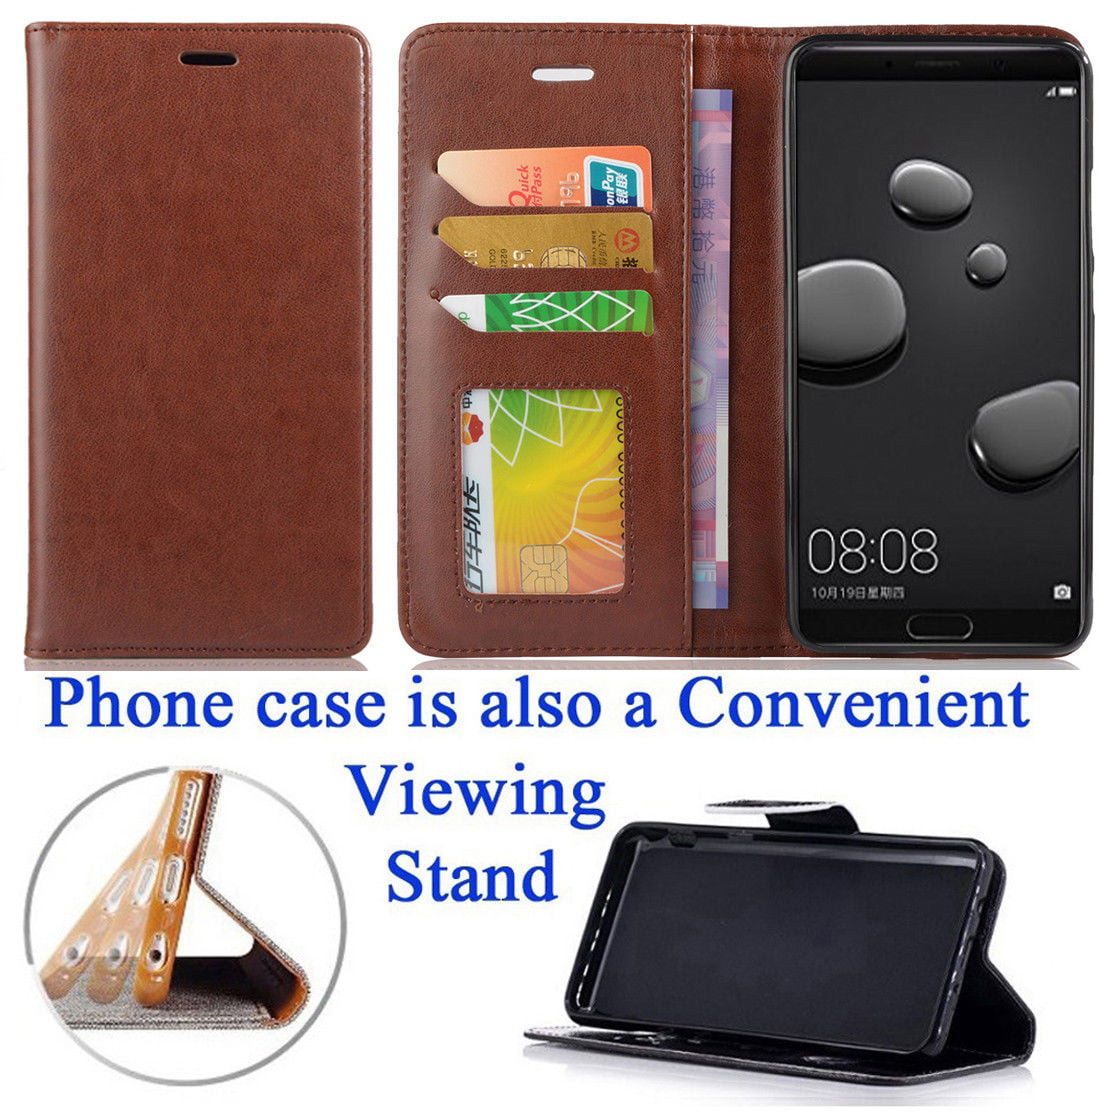 Huawei Mate 20 Pro Case 2018 Shock-Resistant PU Leather Mangntic Wallet Book Flip Kick-Stand Slim Case Cover with Card Slots for Huawei Mate 20 Pro Black Book